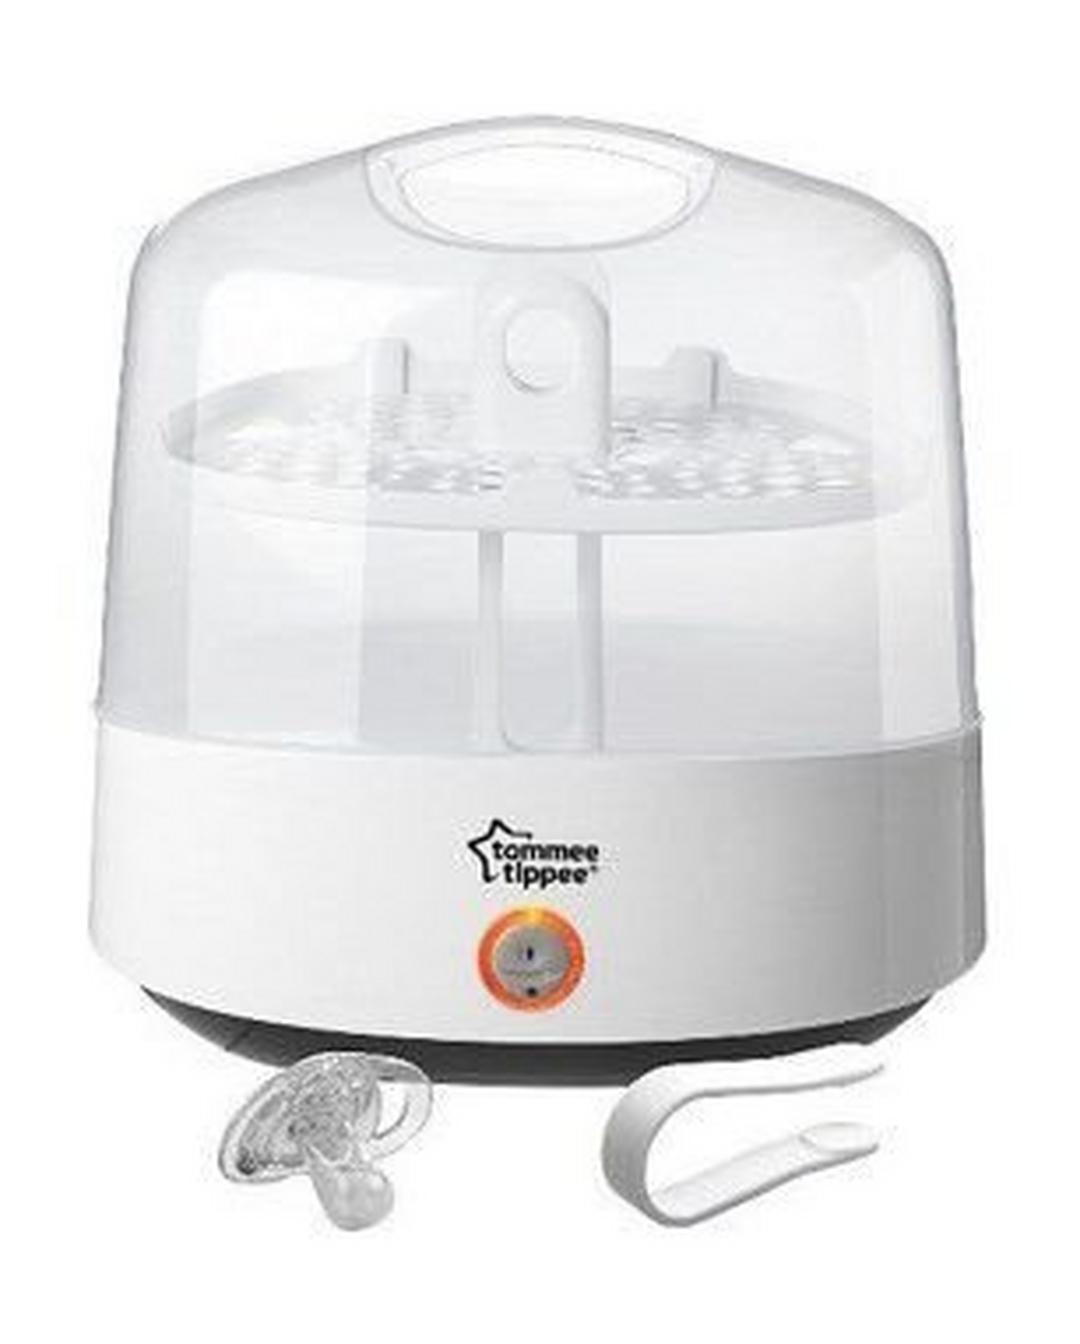 Tommee Tippee Closer To Nature Electric Steam Steriliser - TT423210